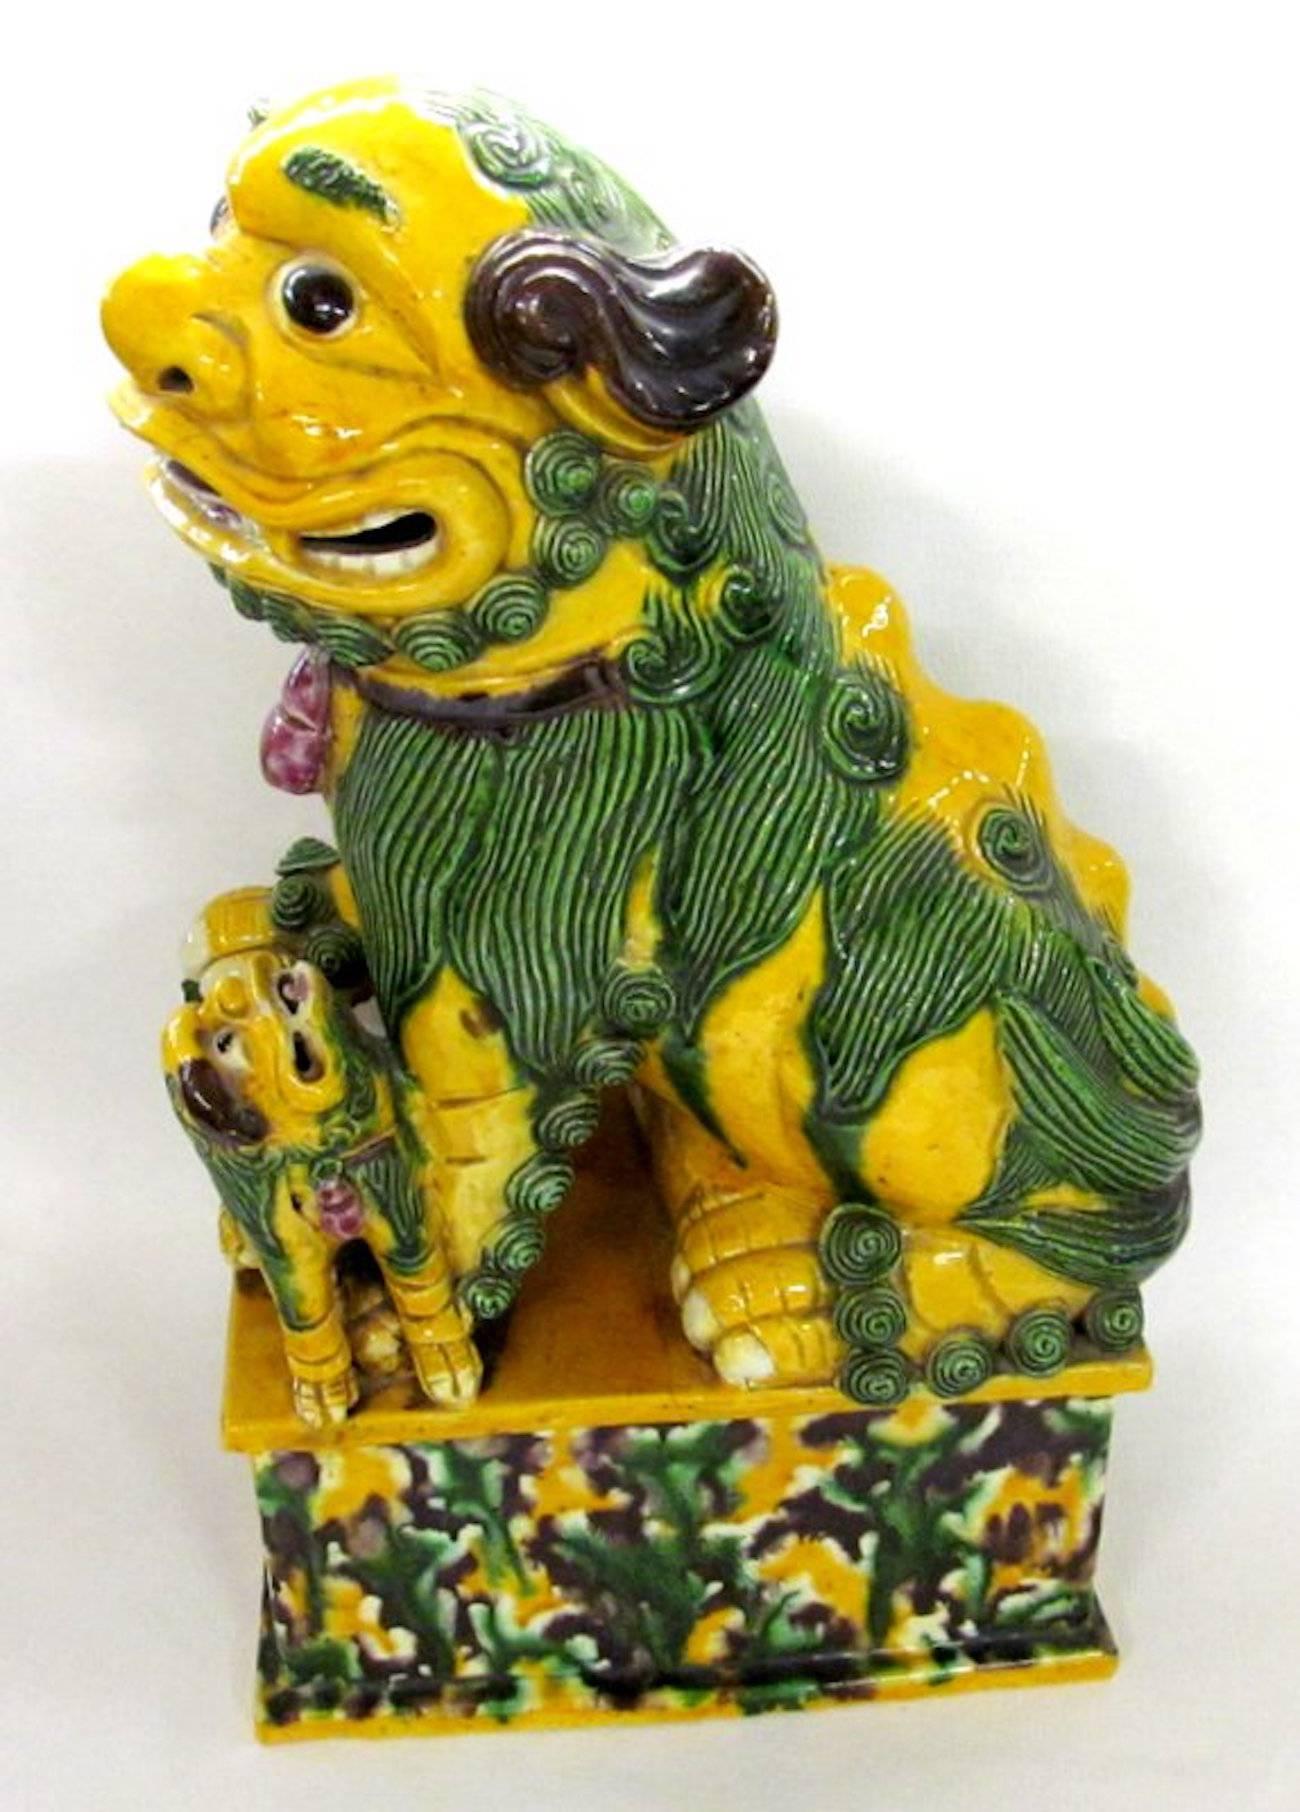 Qing Antique Chinese Export Polychrome Ceramic Foo Dogs with Egg & Spinach Glaze